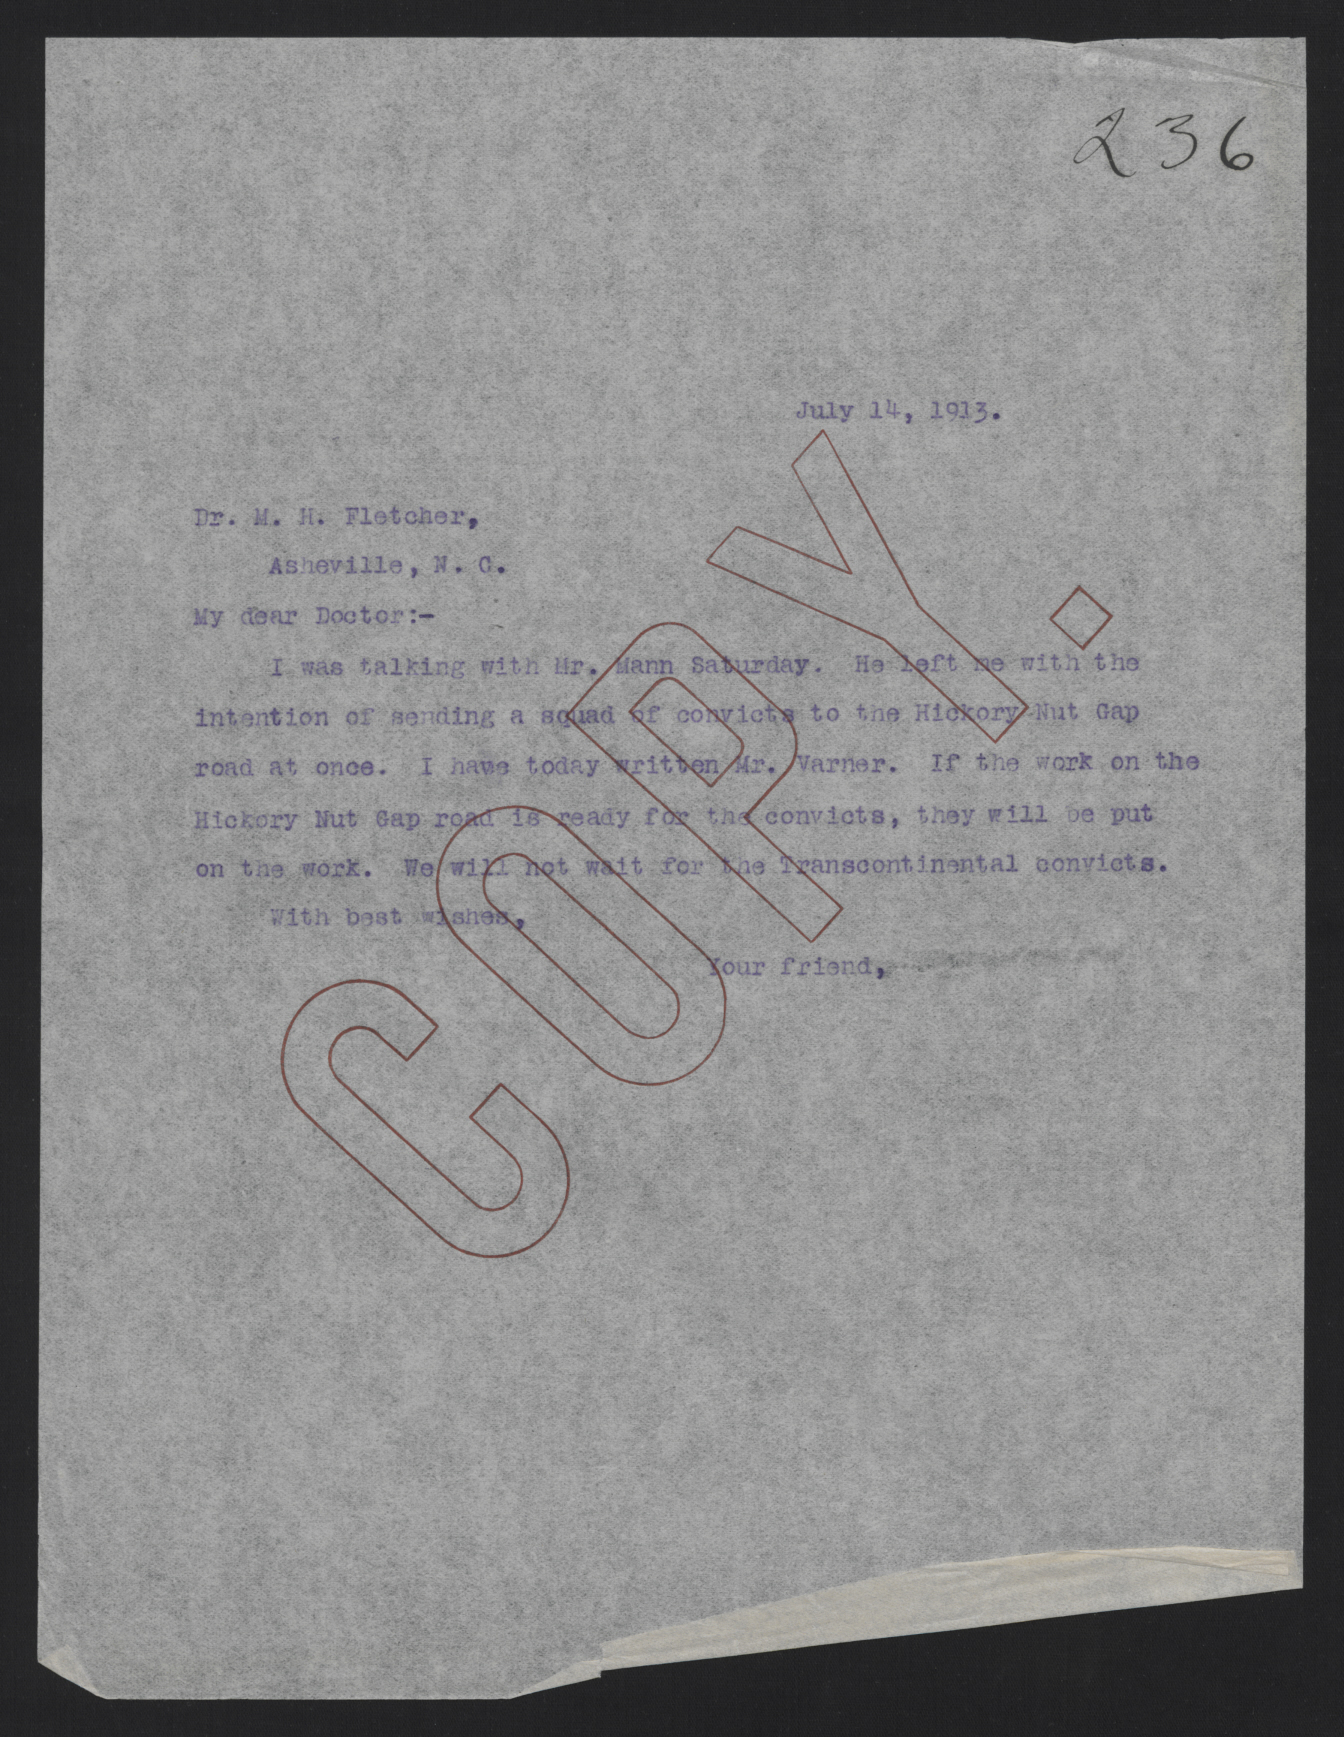 Letter from Craig to Fletcher, July 14, 1913